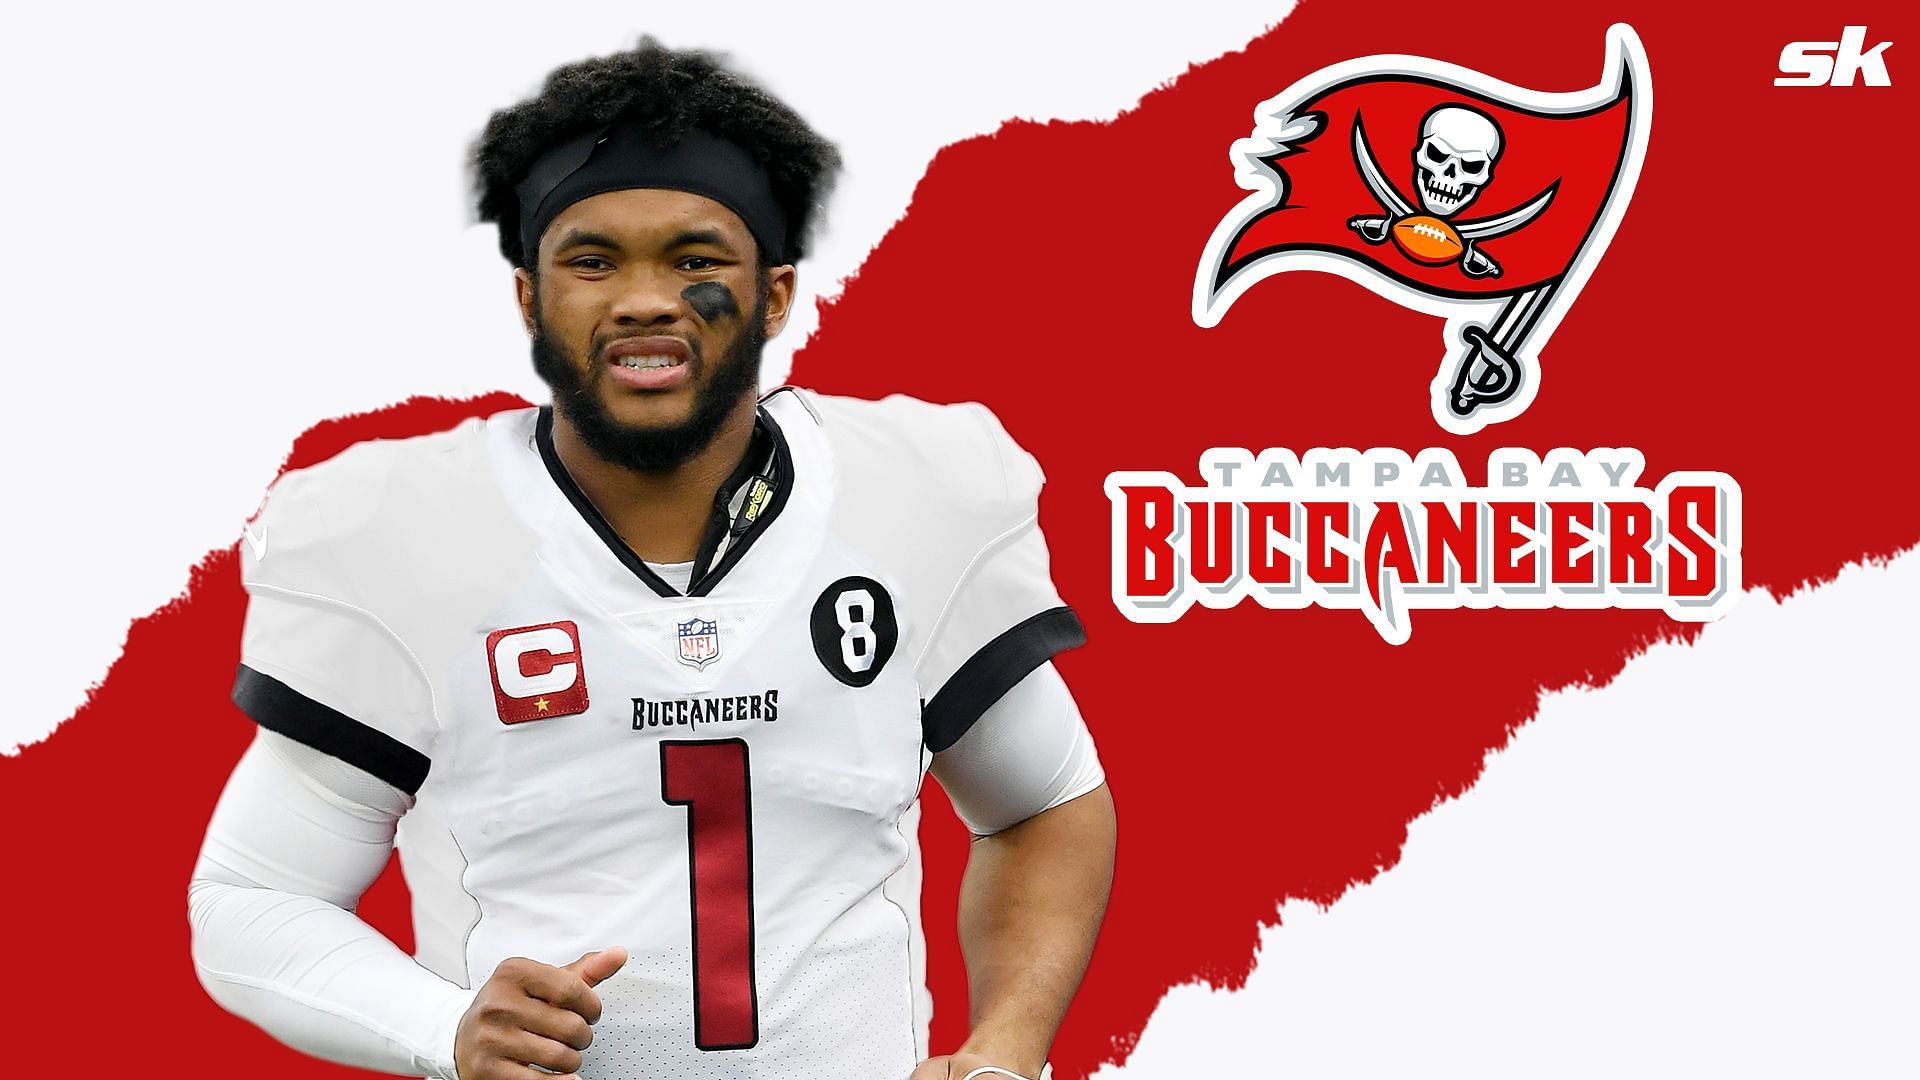 Could Kyler Murray be the next Buccaneer QB?